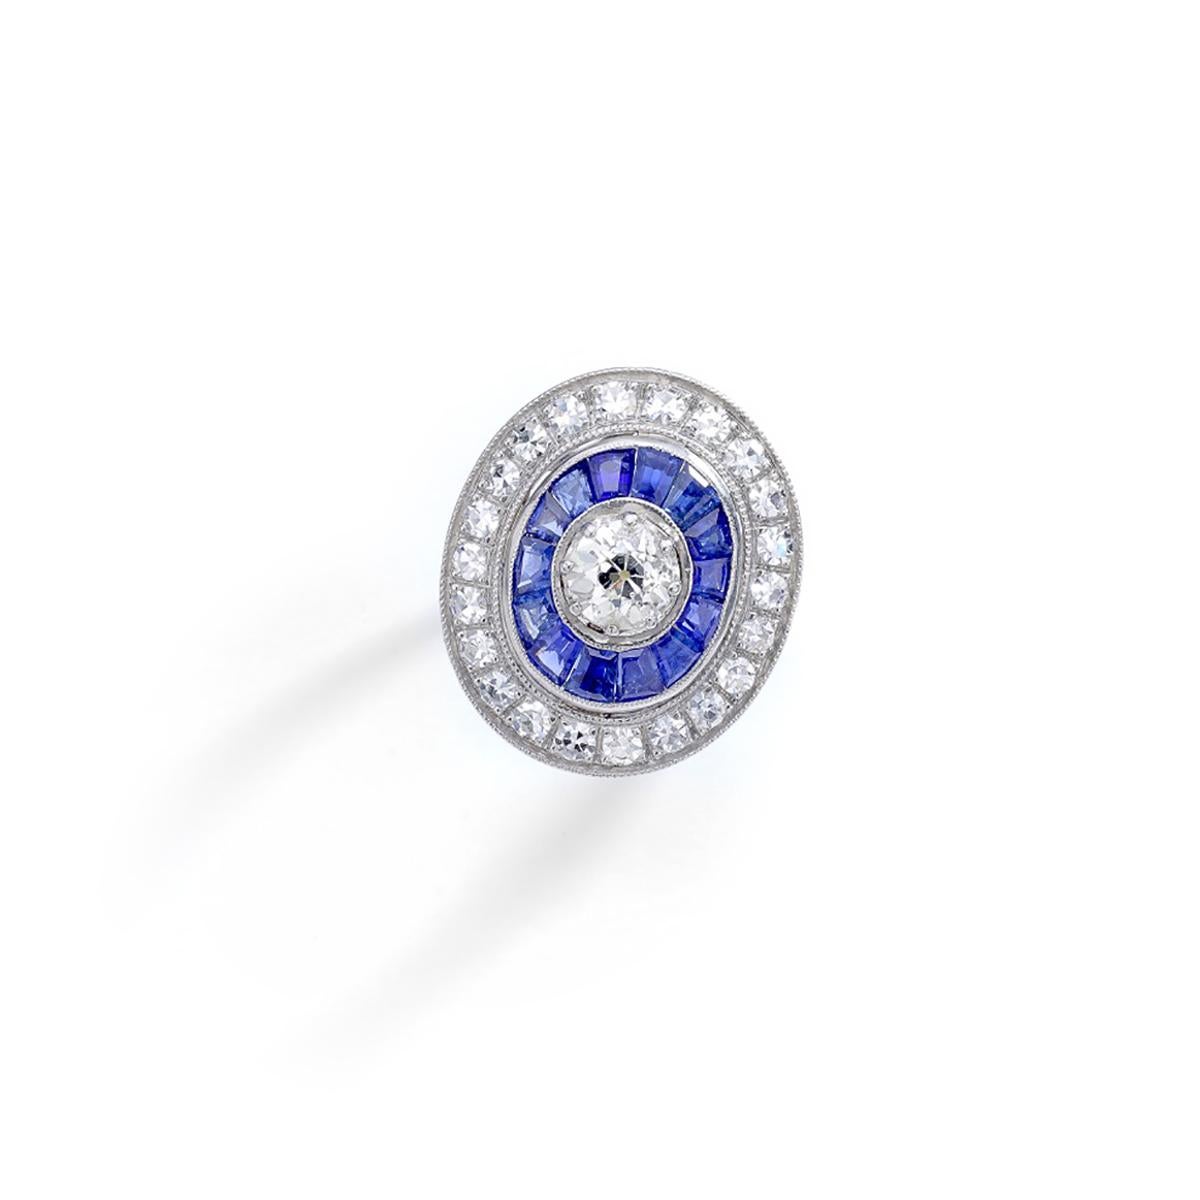 Superb Platinum ring centered by an Old-mine cut diamond surrounded by calibrated sapphire and diamond.
The side border is beautifully engraved of flowers and Art Deco motifs.

Total diamond weight: 1.40 carats.
Gross weight: 8.12 grams.